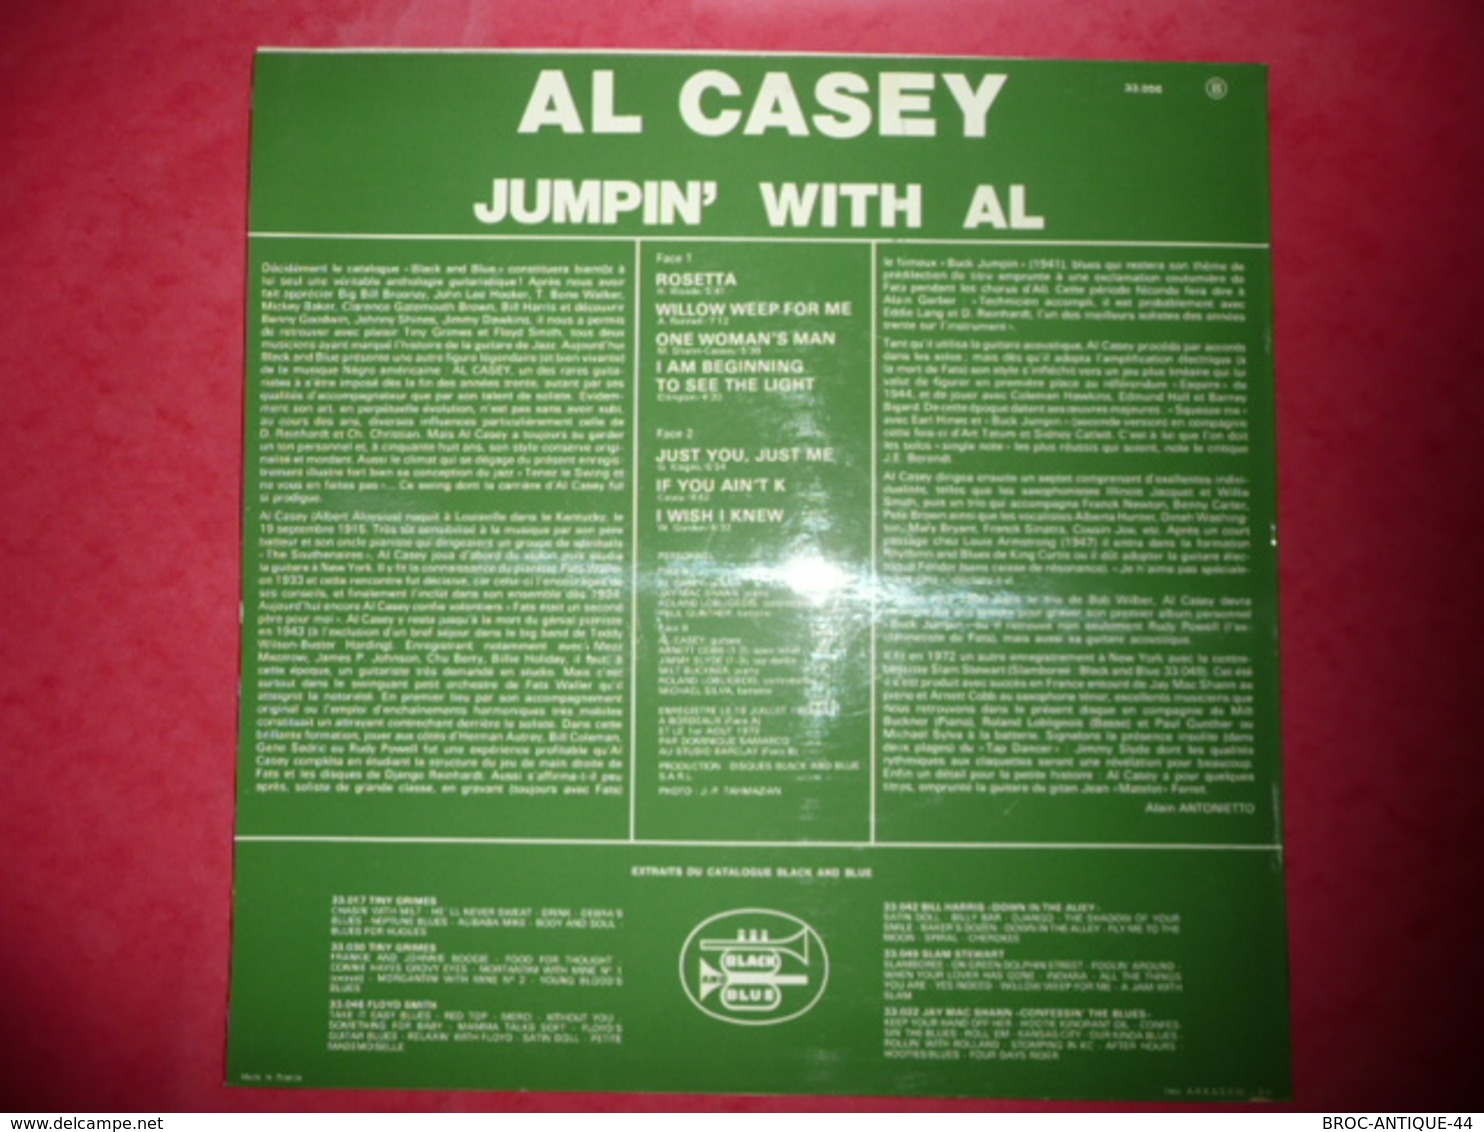 LP33 N°1156 - AL CASEY - JUMPIN' WITH AL - COMPILATION 7 TITRES JAZZ BLUES SWING - Jazz